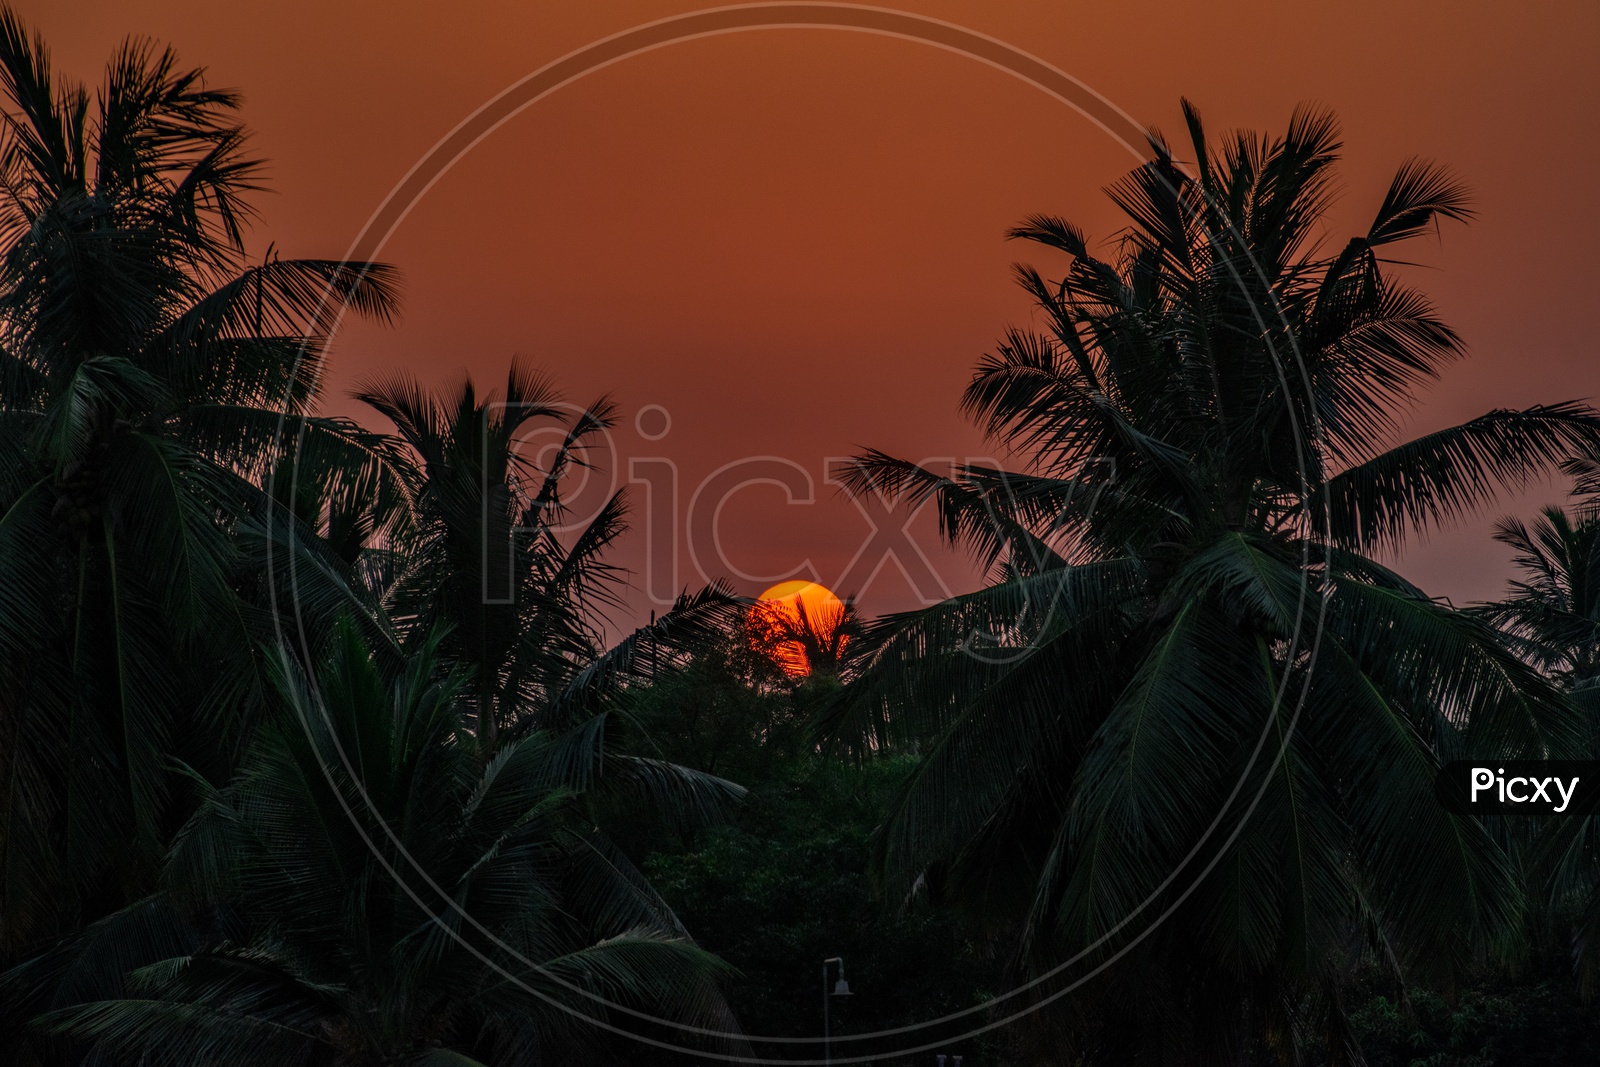 SUNSET OVER COCONUT TREES  IN A VILLAGE